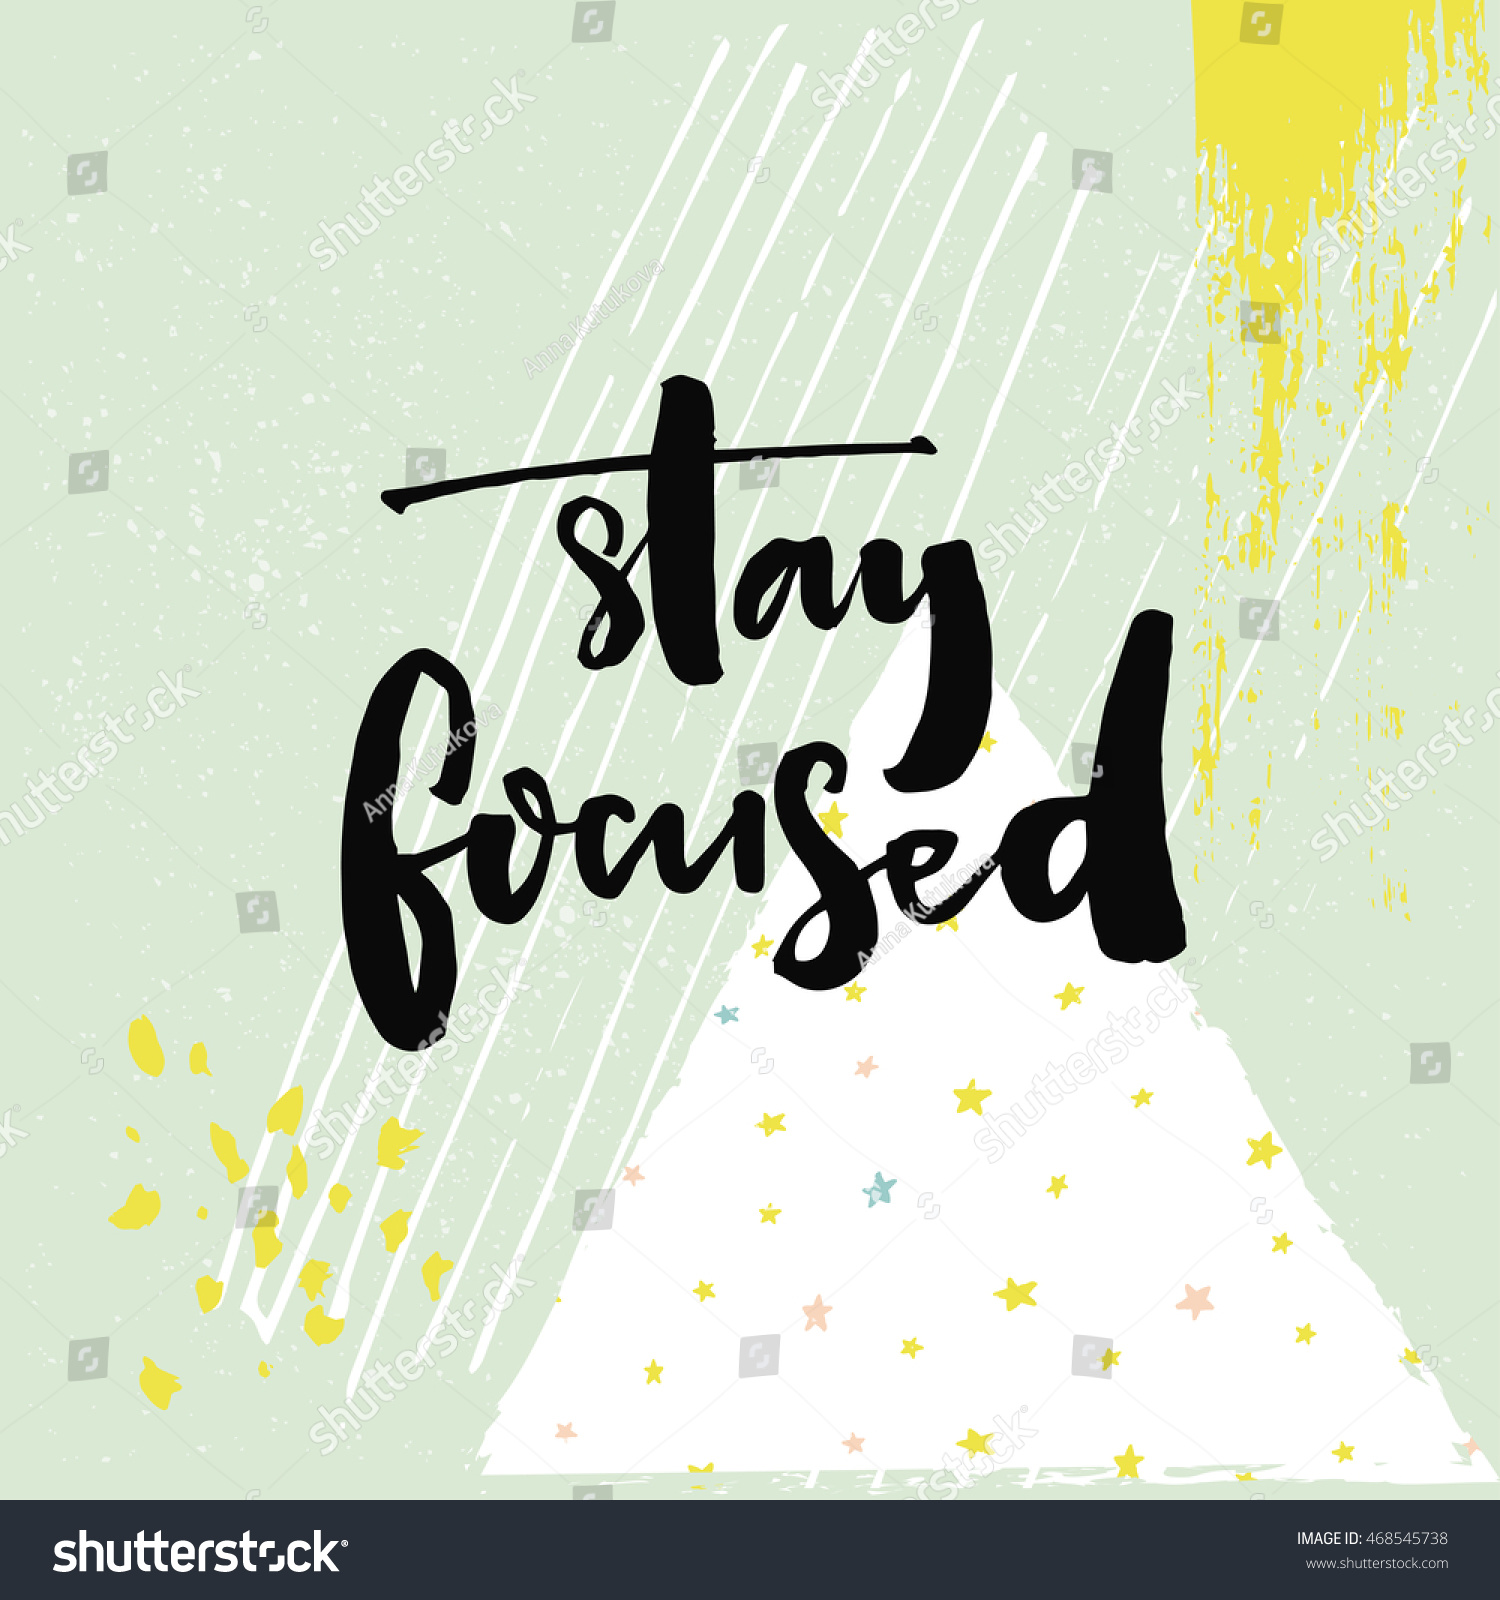 SVG of Stay focused. Motivational quote about productivity and focus on work and study process. Black vector brush calligraphy inscription on green geometry background with hand drawn strokes svg